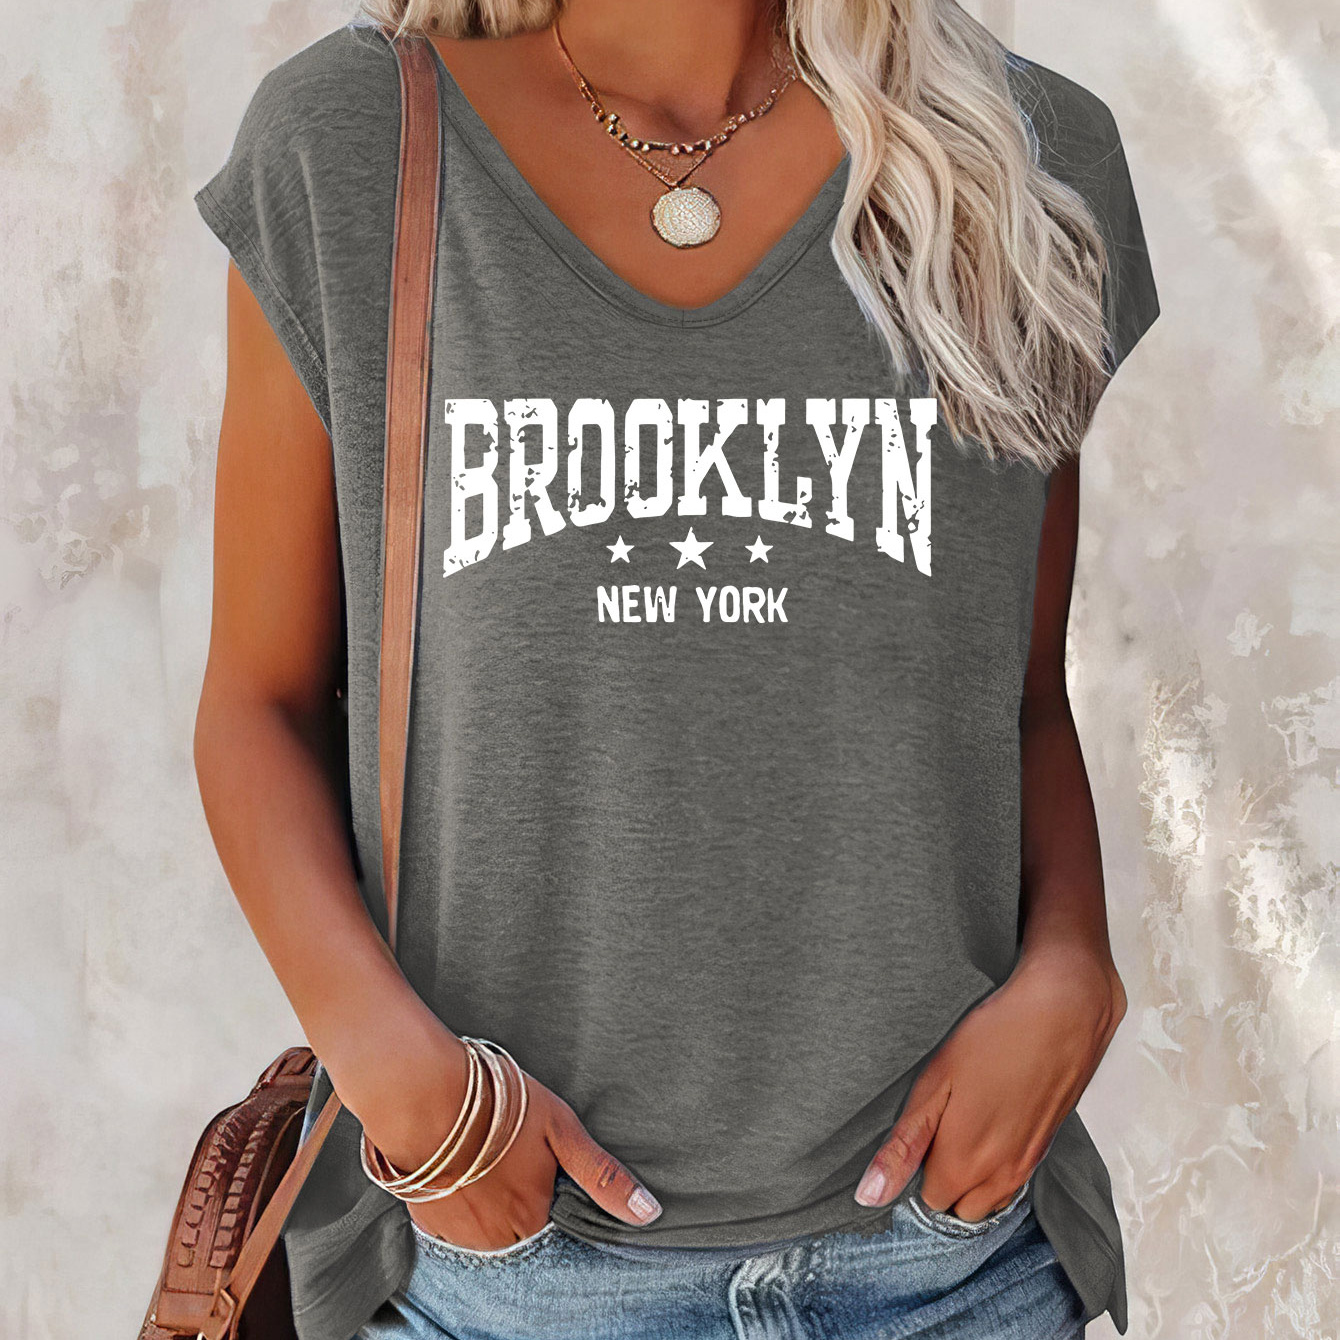 

Brooklyn Print Cap Sleeve Top, Casual Top For Summer & Spring, Women's Clothing